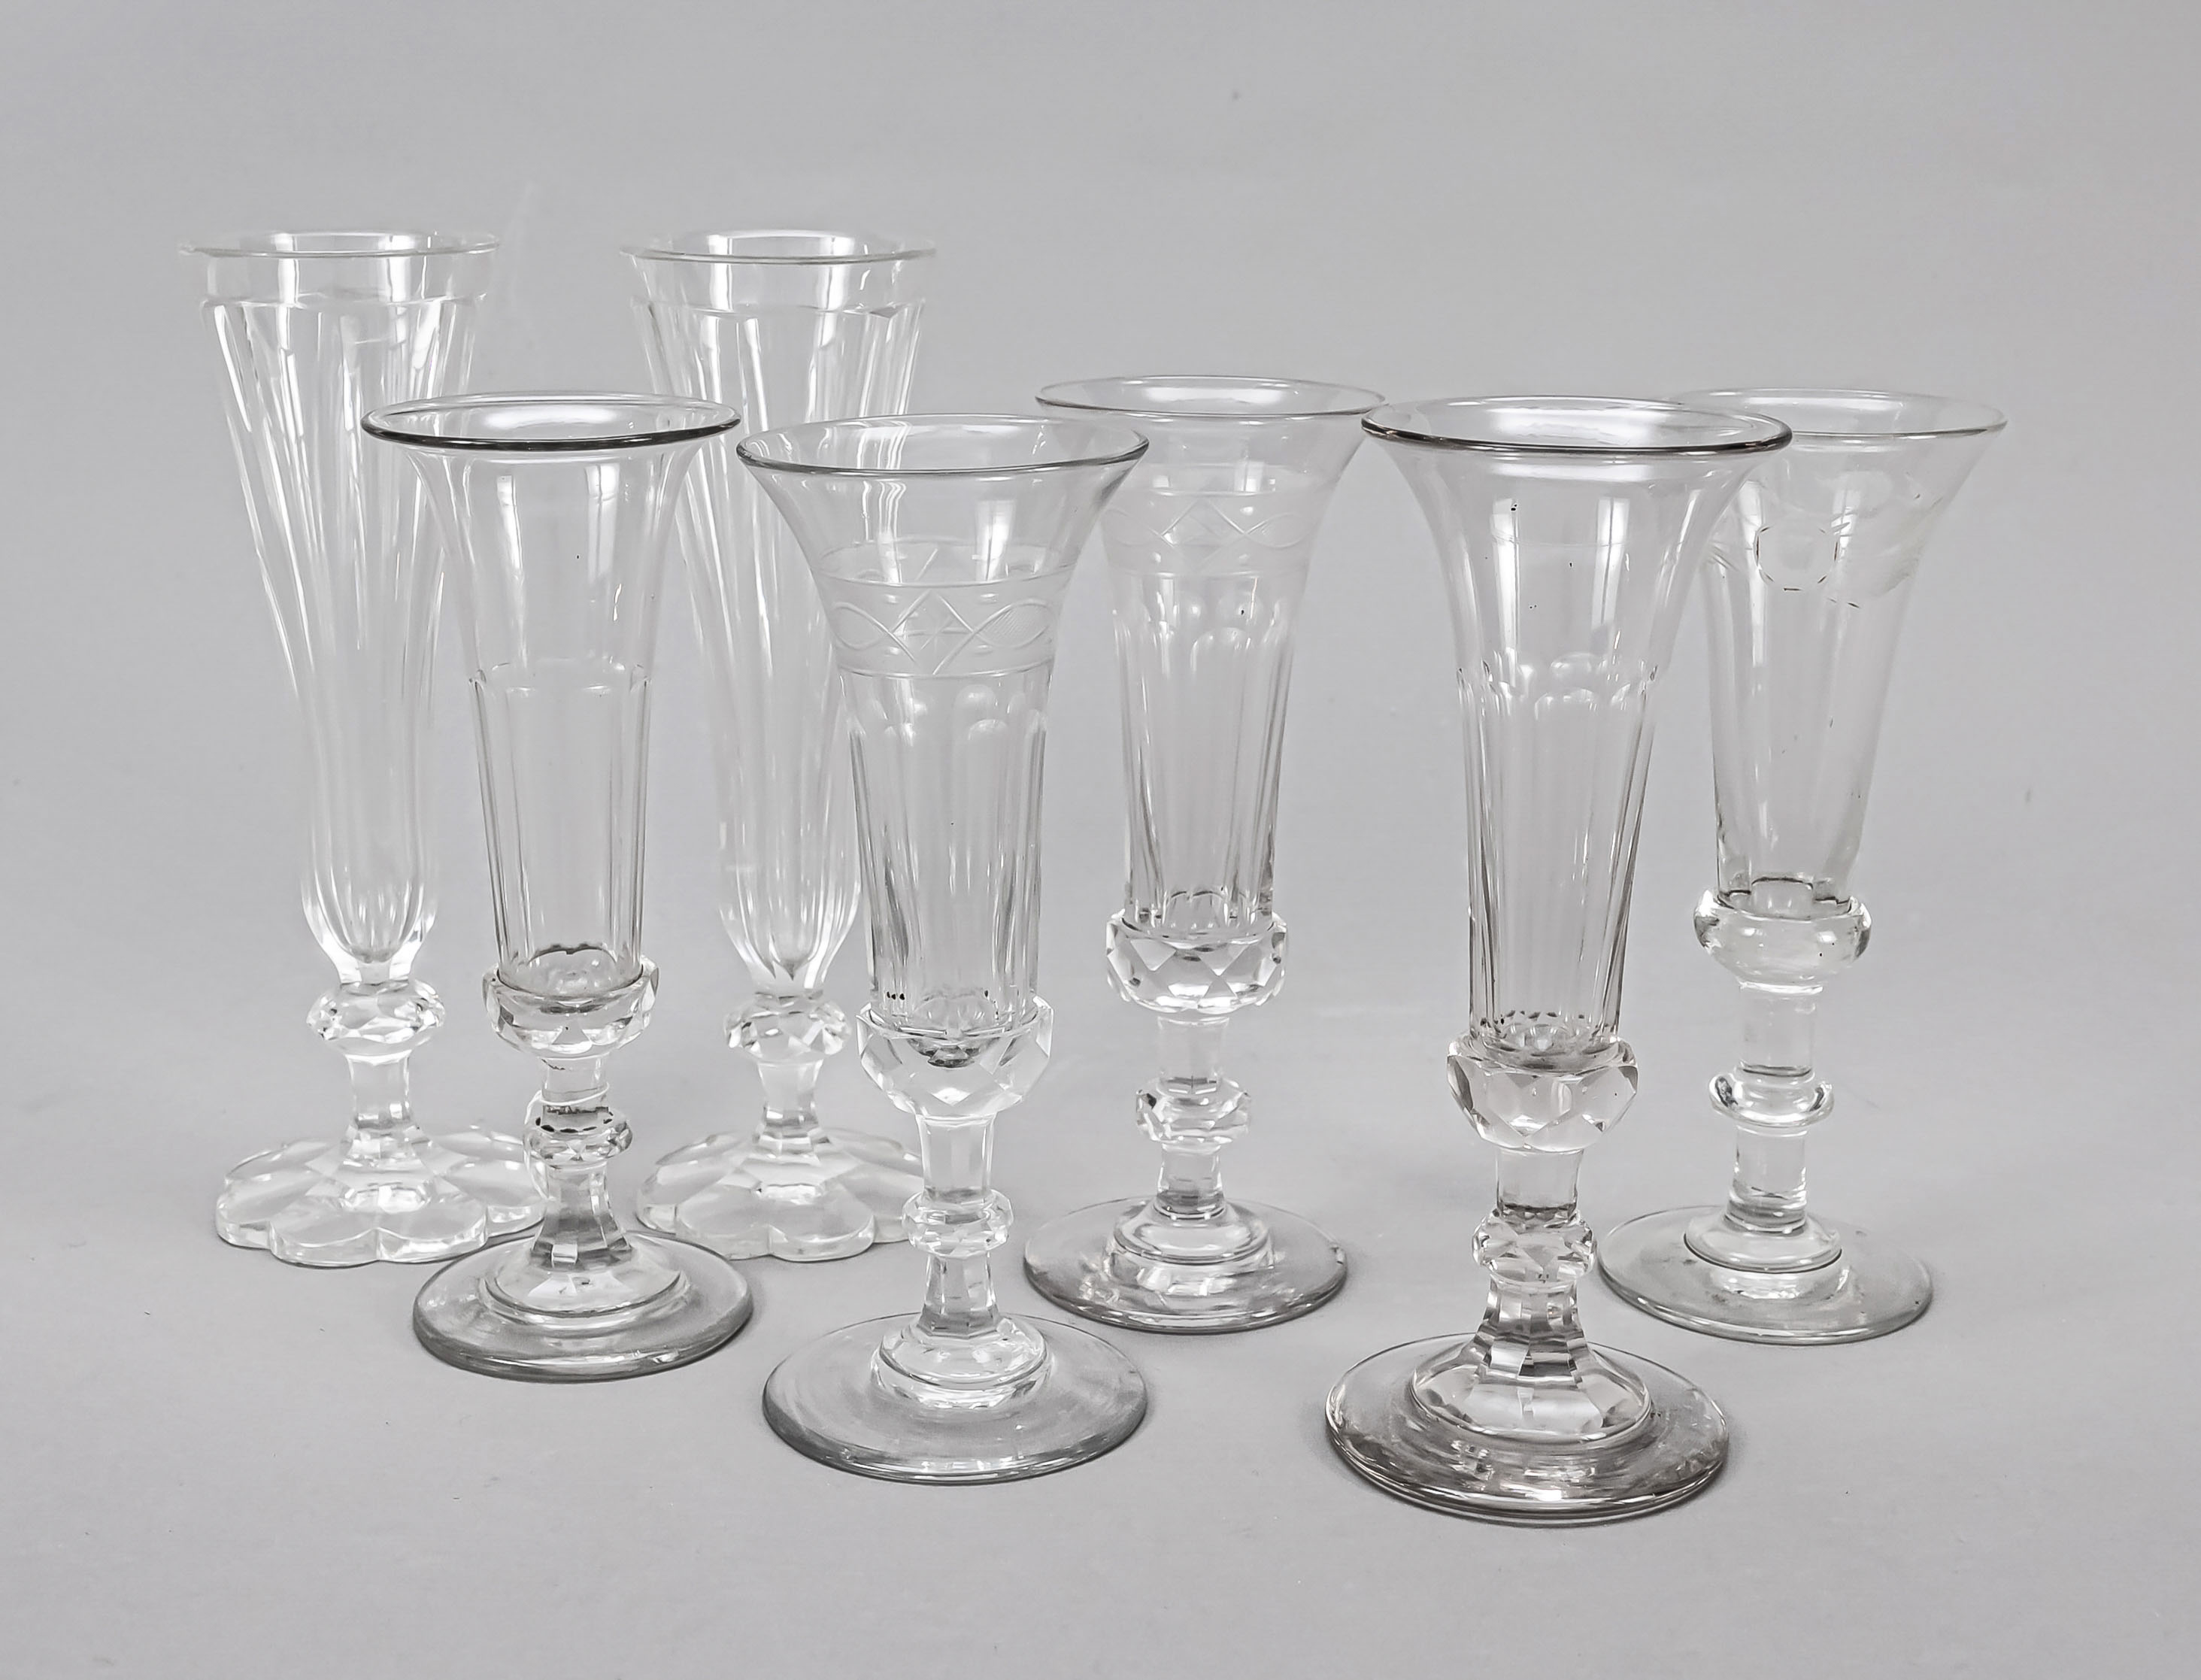 Set of seven champagne flutes, 19th/20th century, different shapes and sizes, each clear glass